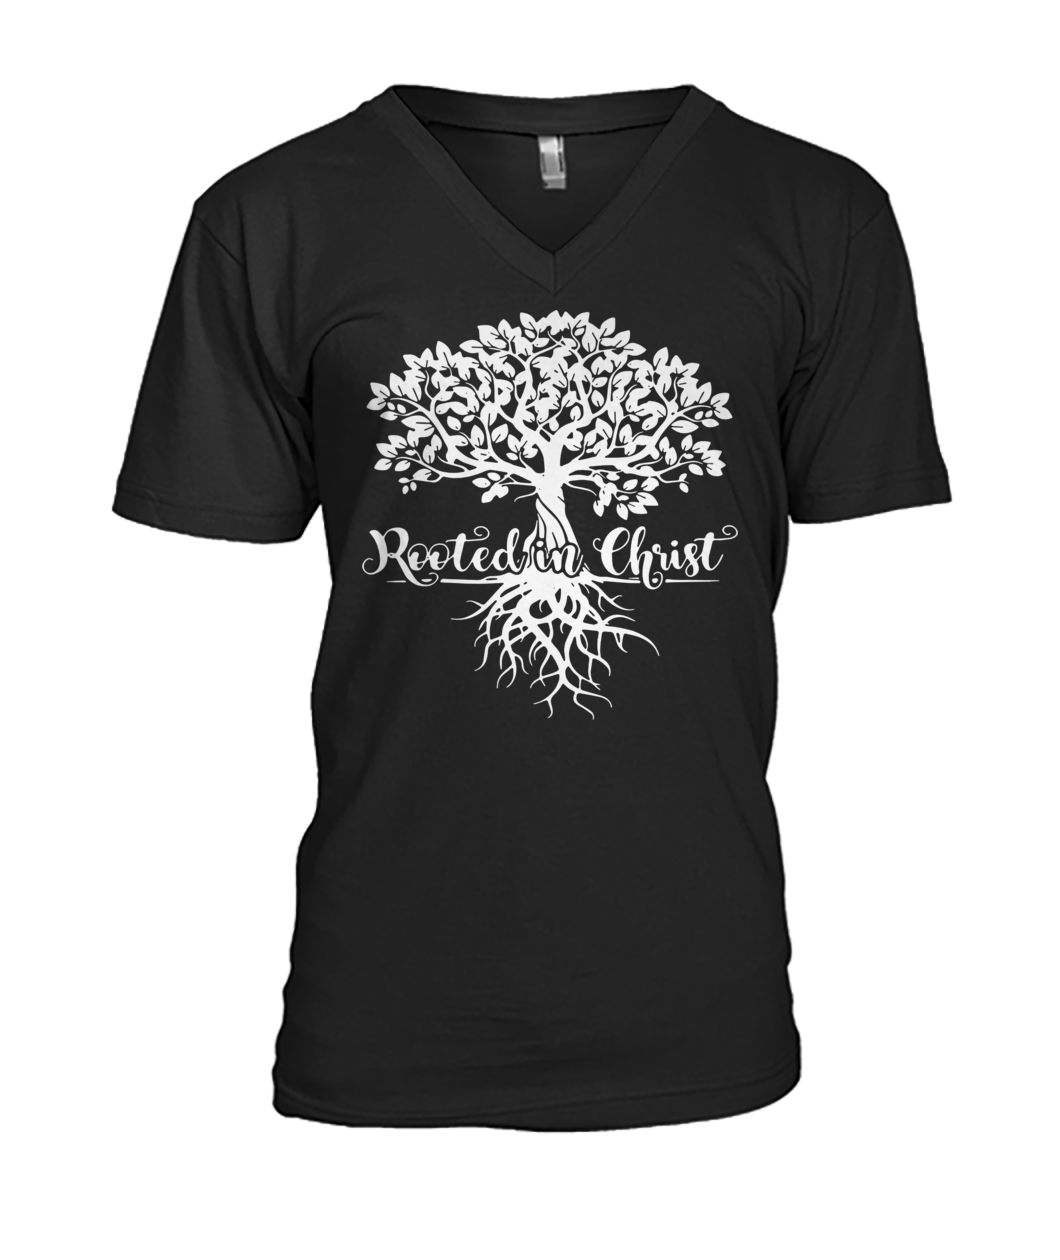 Rooted in christ christian faith and love in God mens v-neck